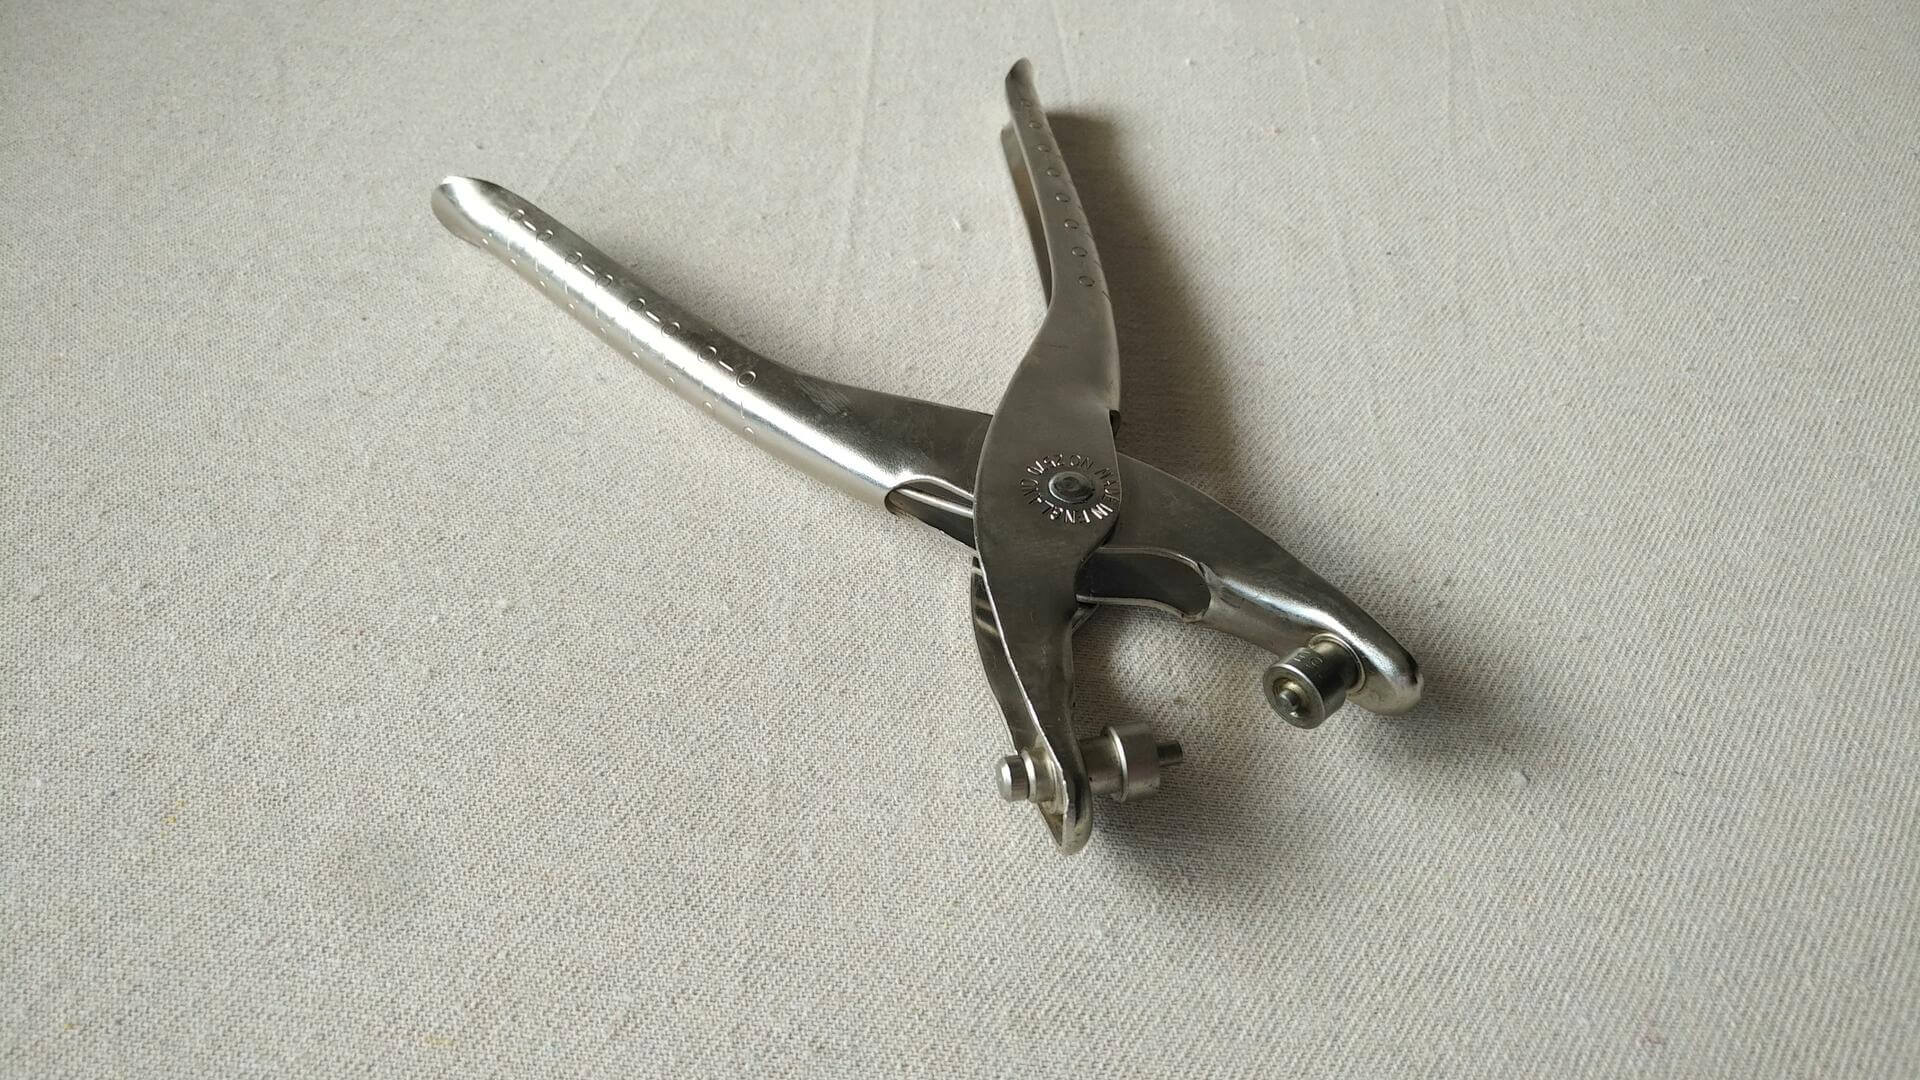 A genuine Maun Industries No 2570-165 punching and eyelet pliers for 5/32" eyelets. Vintage made in England collectible leathercraft hand tools